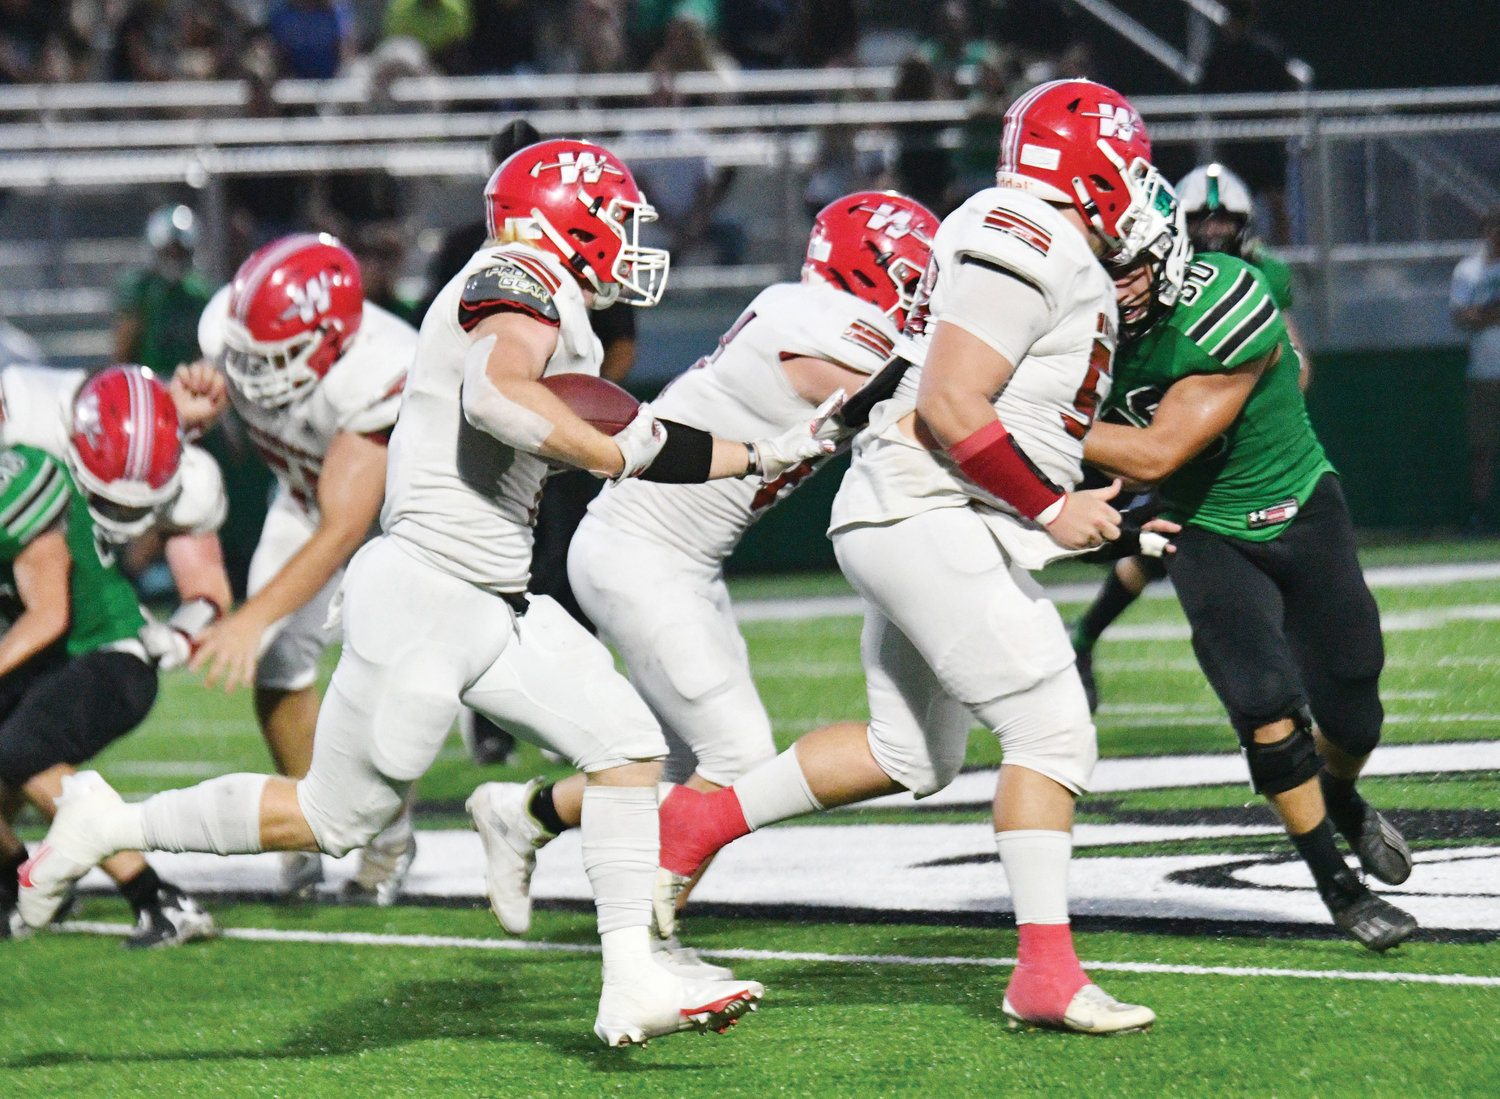 Washington senior Cole Scott (7) gets help from his senior buddy, Caleb Bruce (53), in the form of a lead blocker during the Warriors’ 33-14 win over Jones.